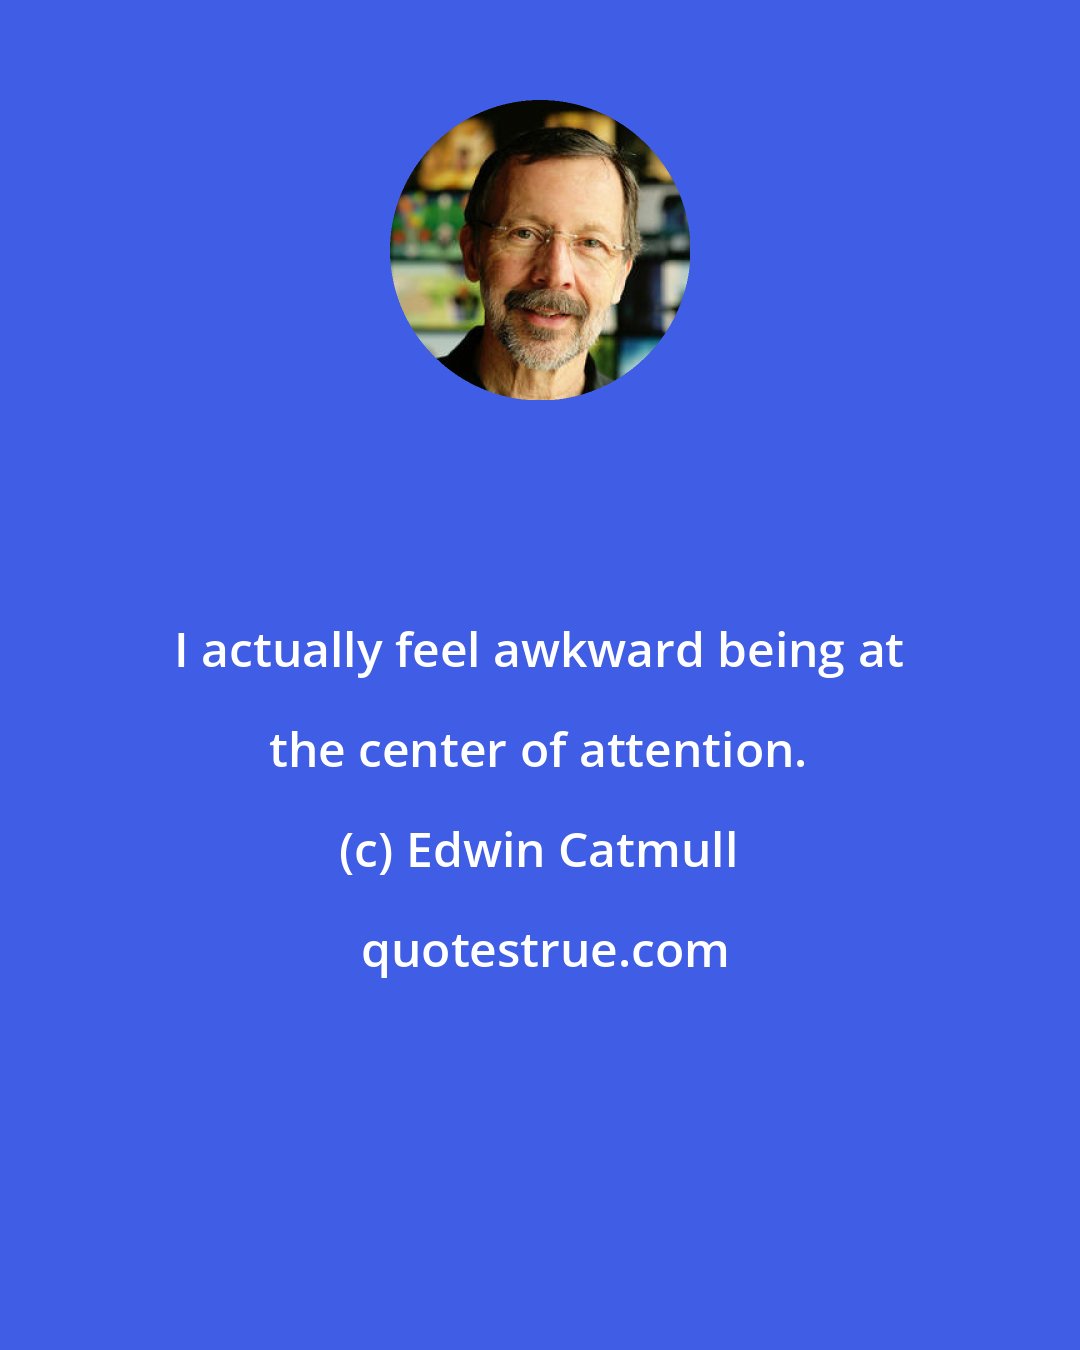 Edwin Catmull: I actually feel awkward being at the center of attention.